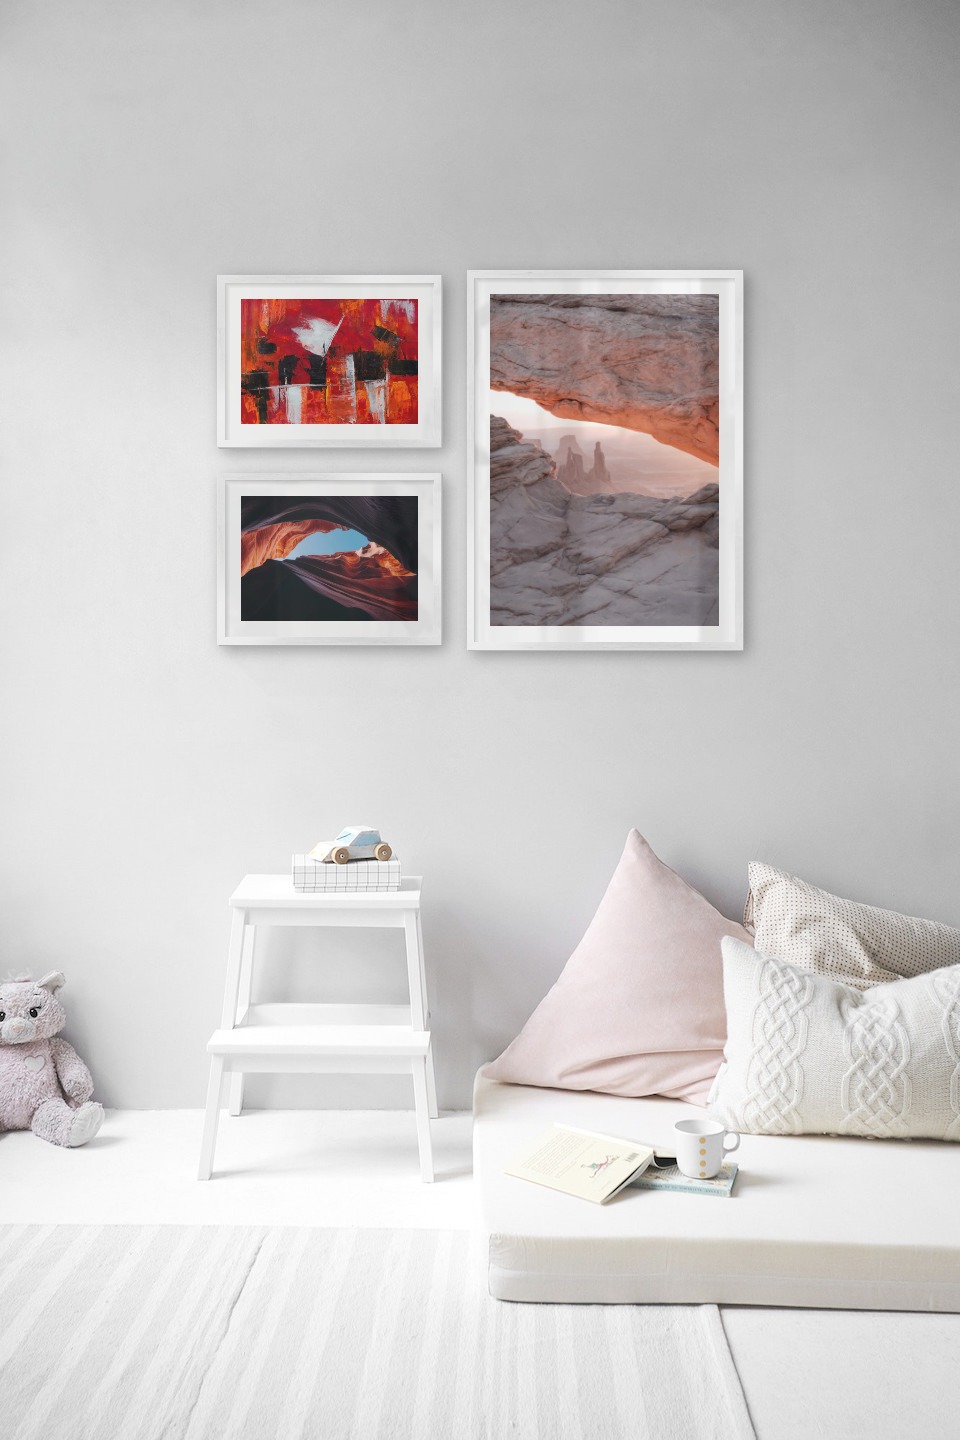 Gallery wall with picture frames in silver in sizes 30x40 and 50x70 with prints "Abstract art 4", "Red rock formations" and "View between cliffs"